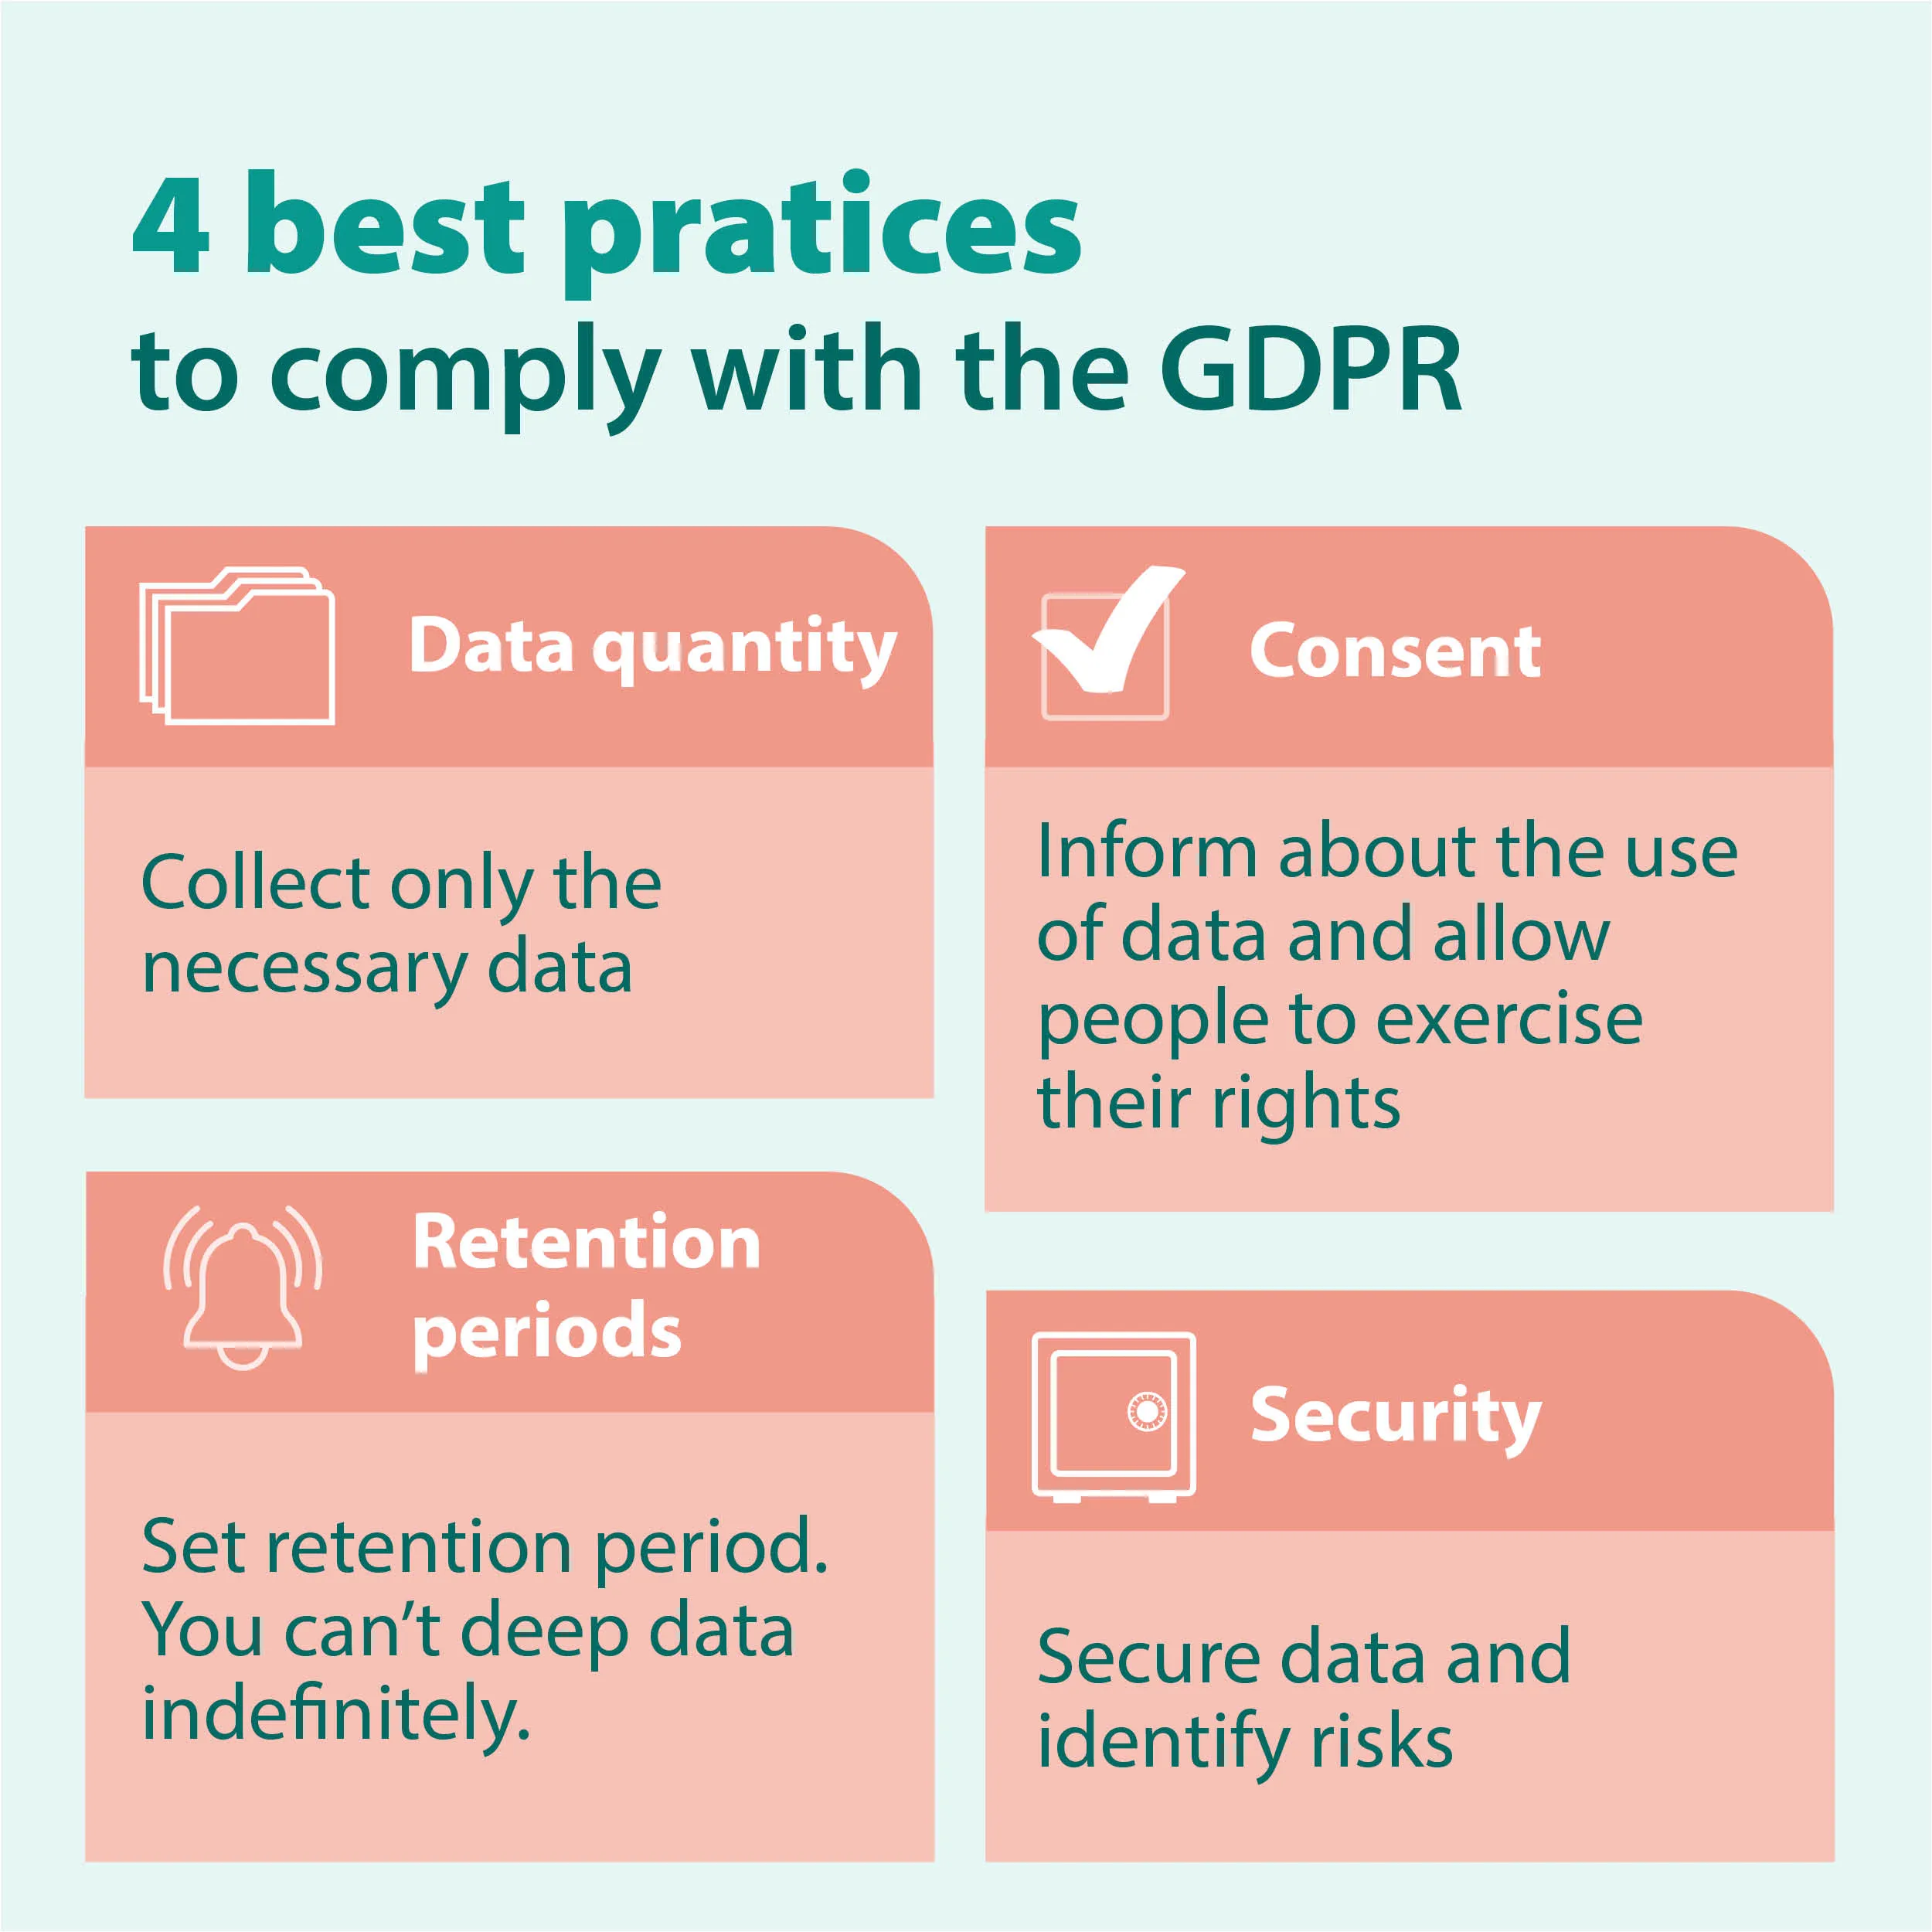 4 best pratices to comply with the GDPR